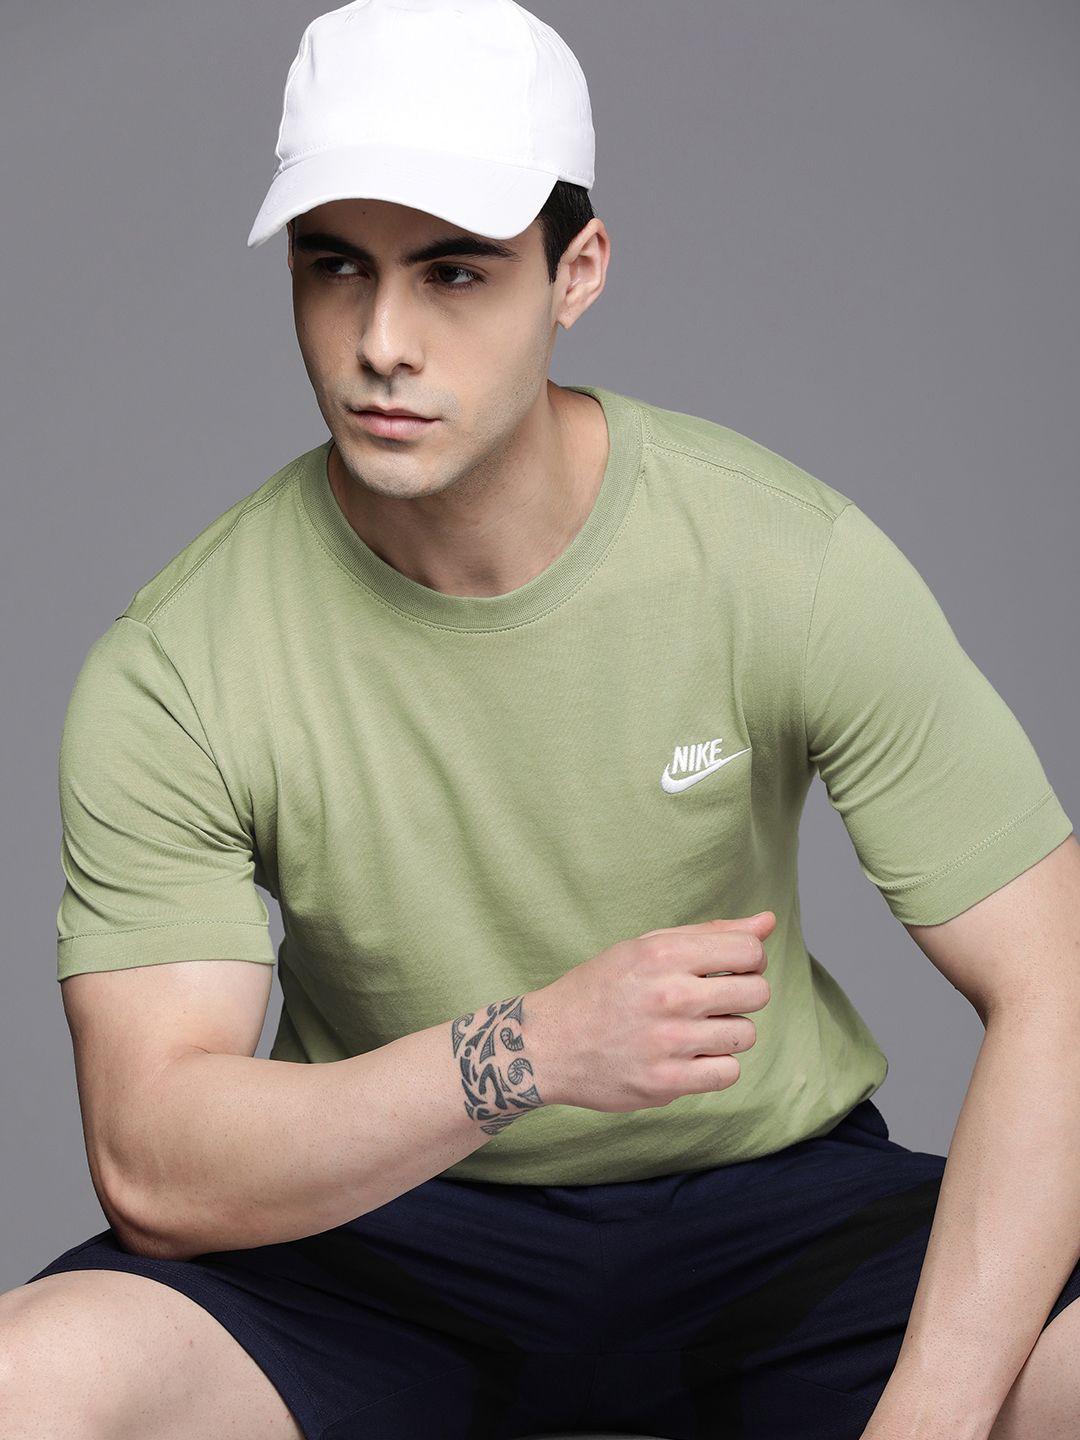 nike brand logo embroidered pure cotton t-shirt